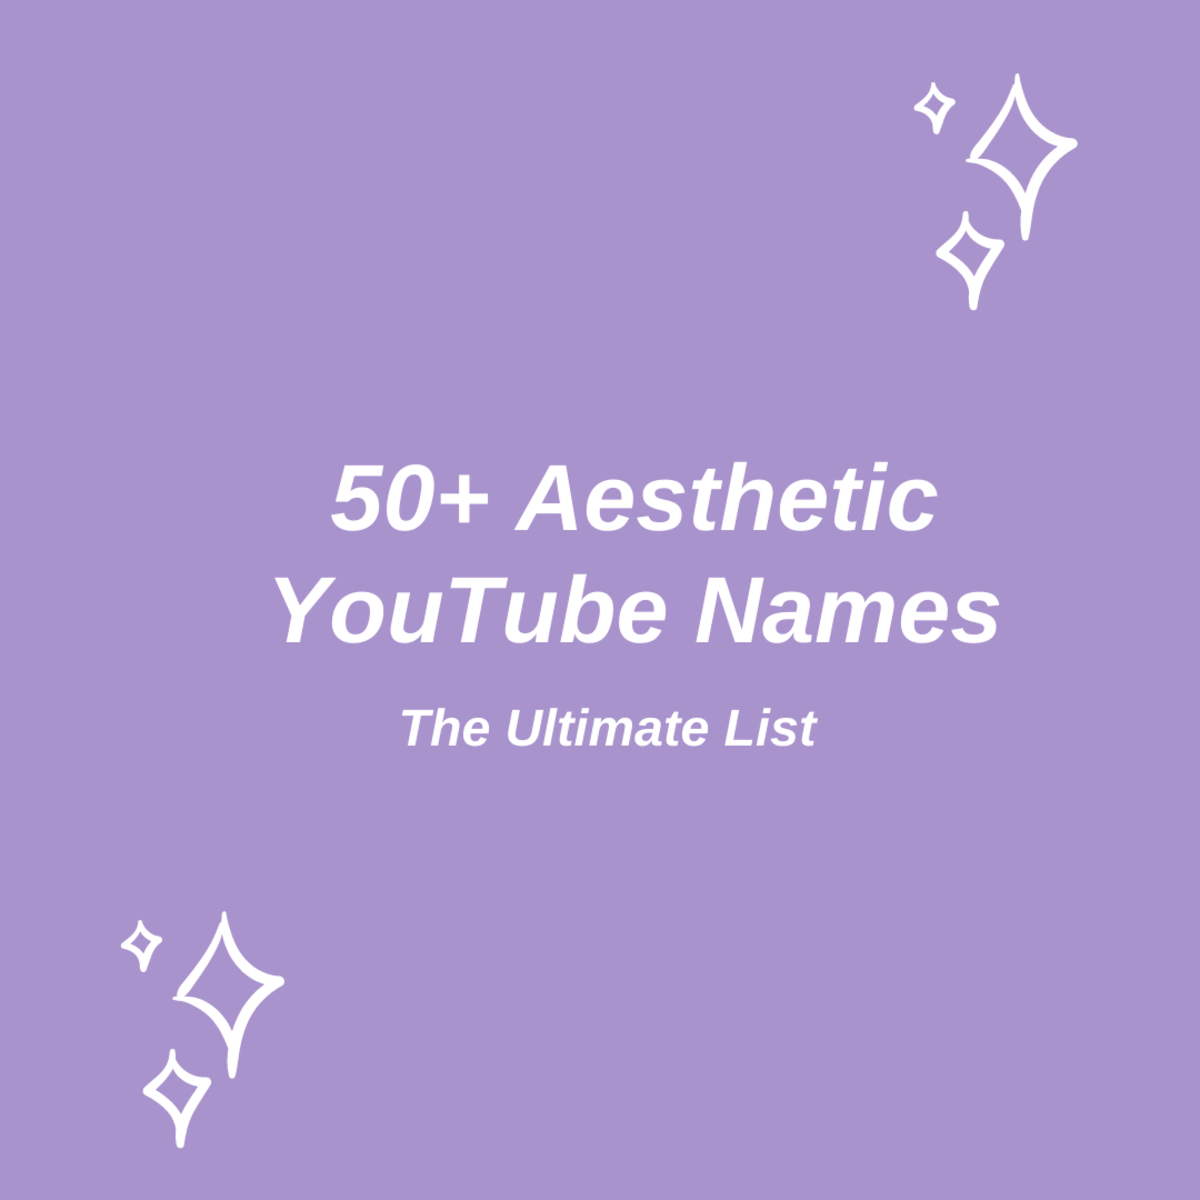 50+ Aesthetic YouTube Names to Check Out: The Ultimate List